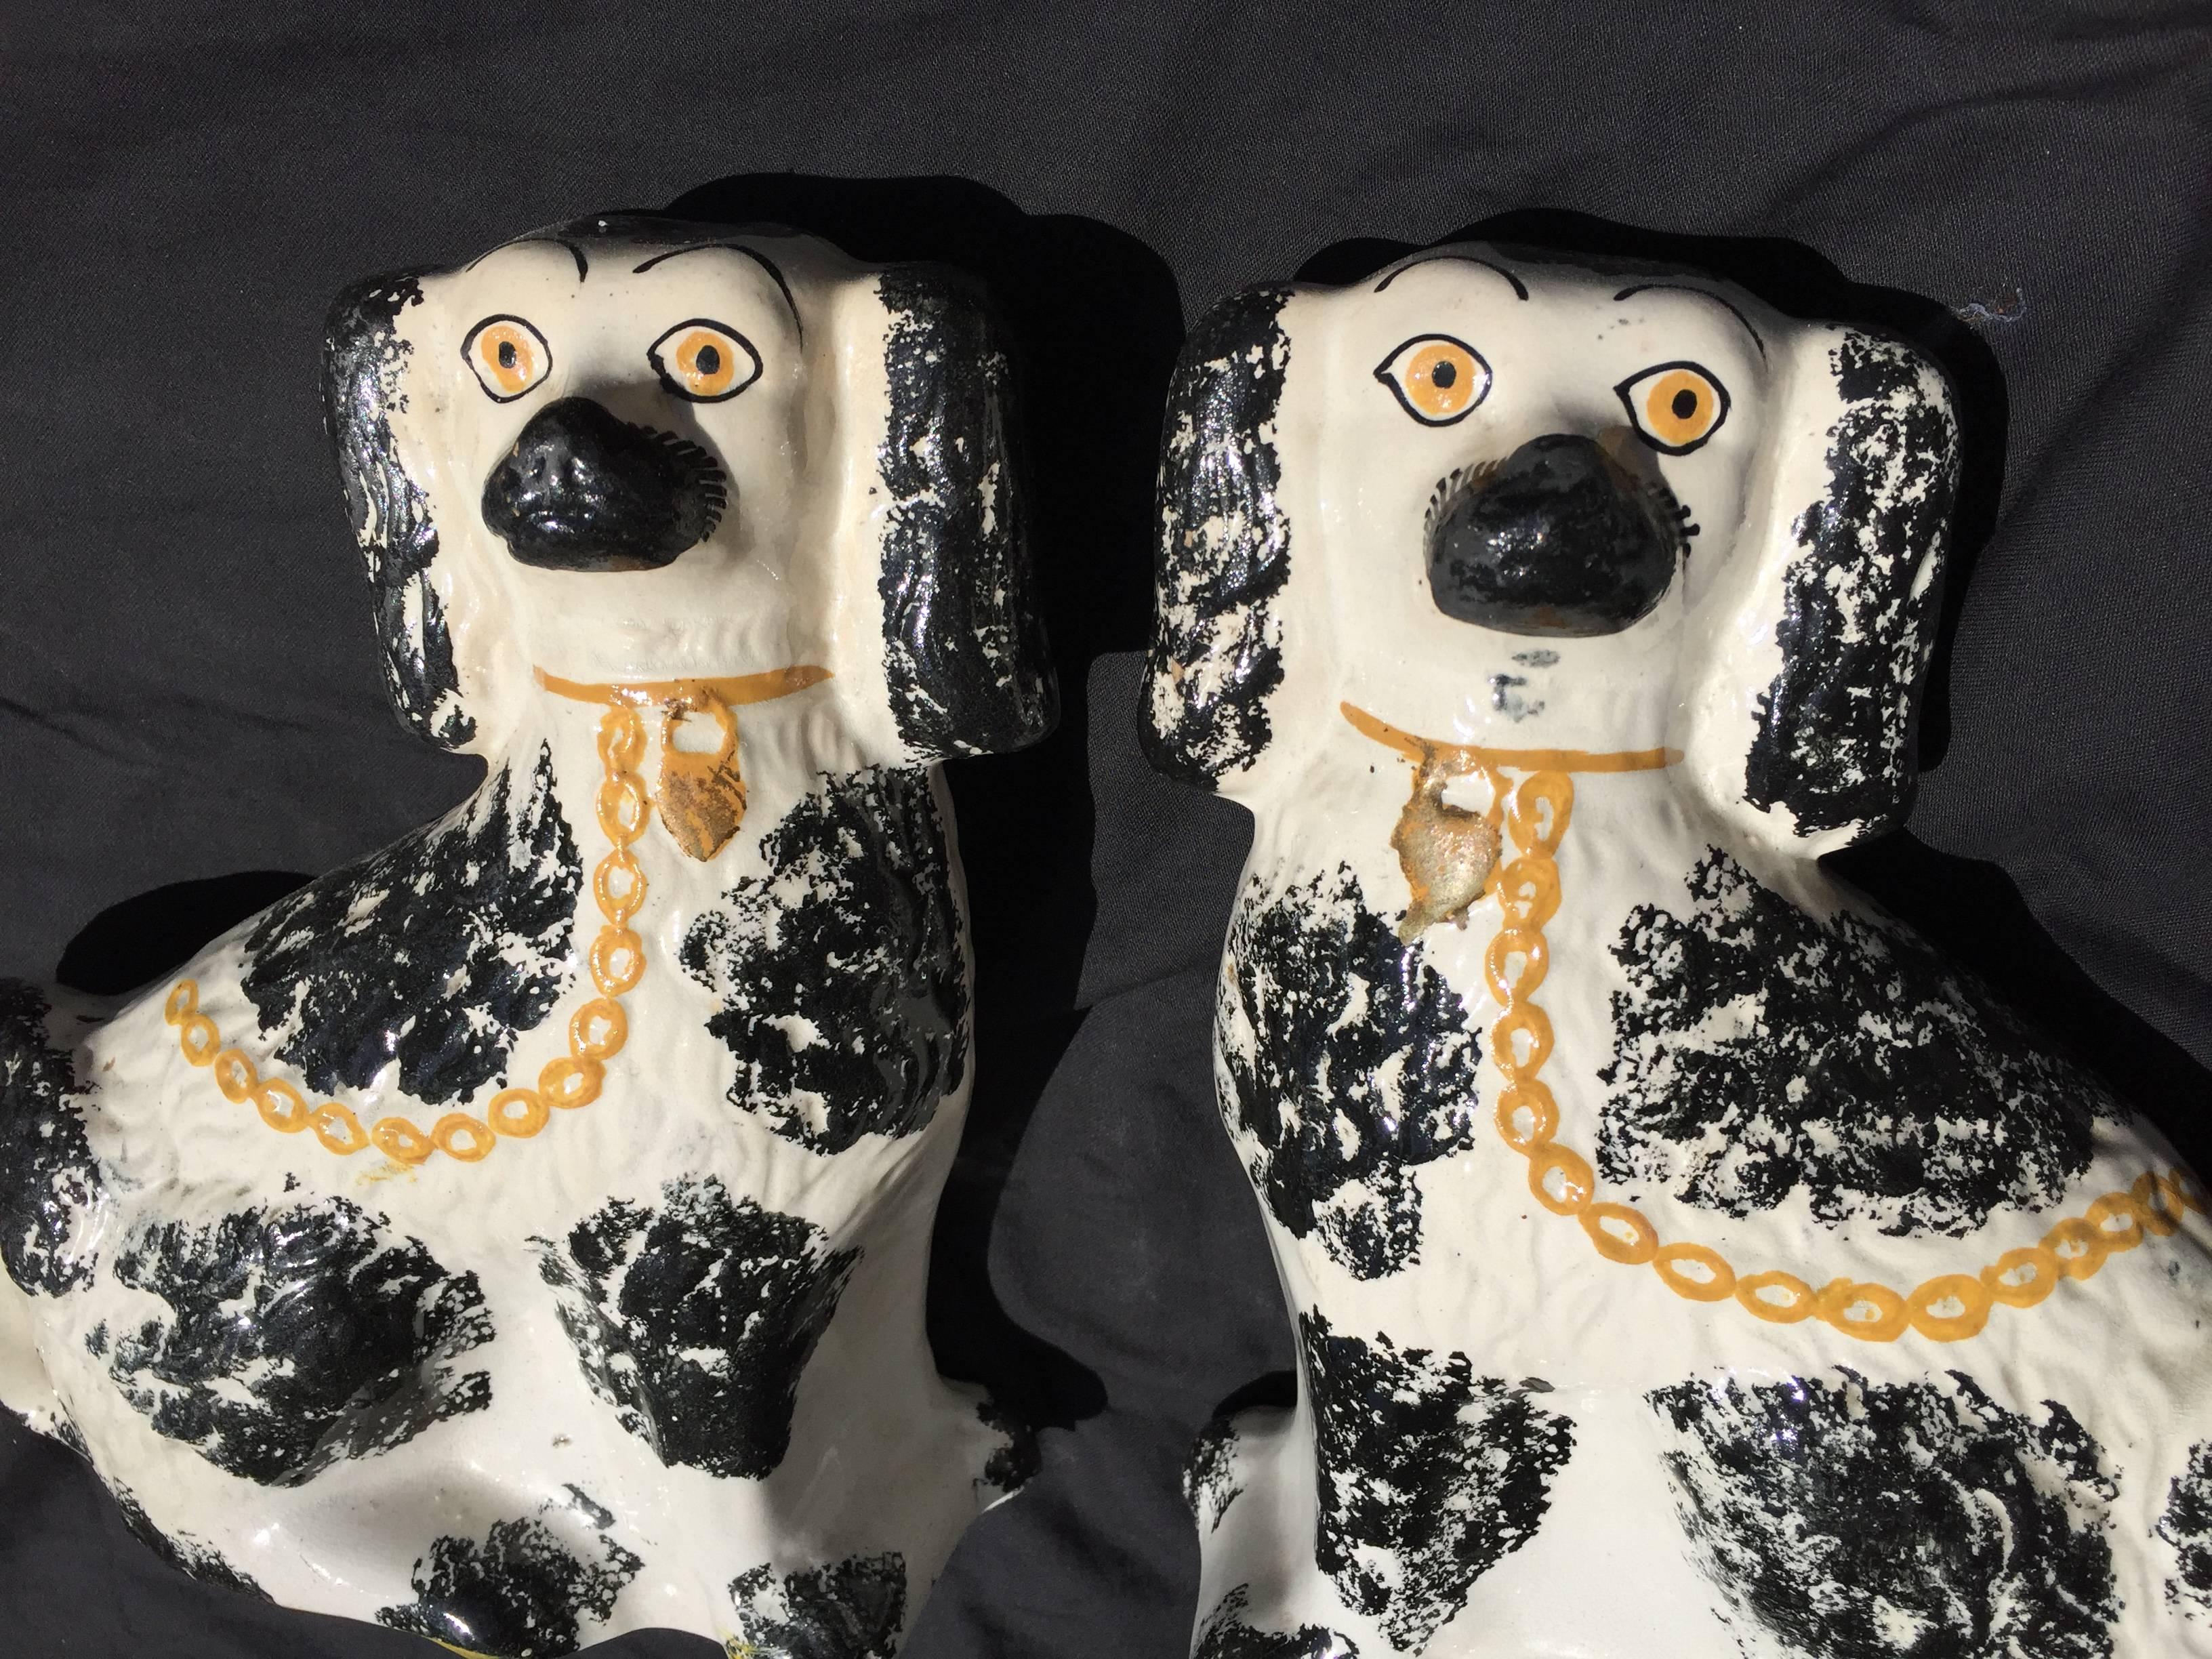 A fine larger scale pair of Staffordshire Classic ceramic black and white Spaniels in superb condition complete with gilt collars, dating to the mid-19th century. You wont find finer examples.

Dimensions: 10.5